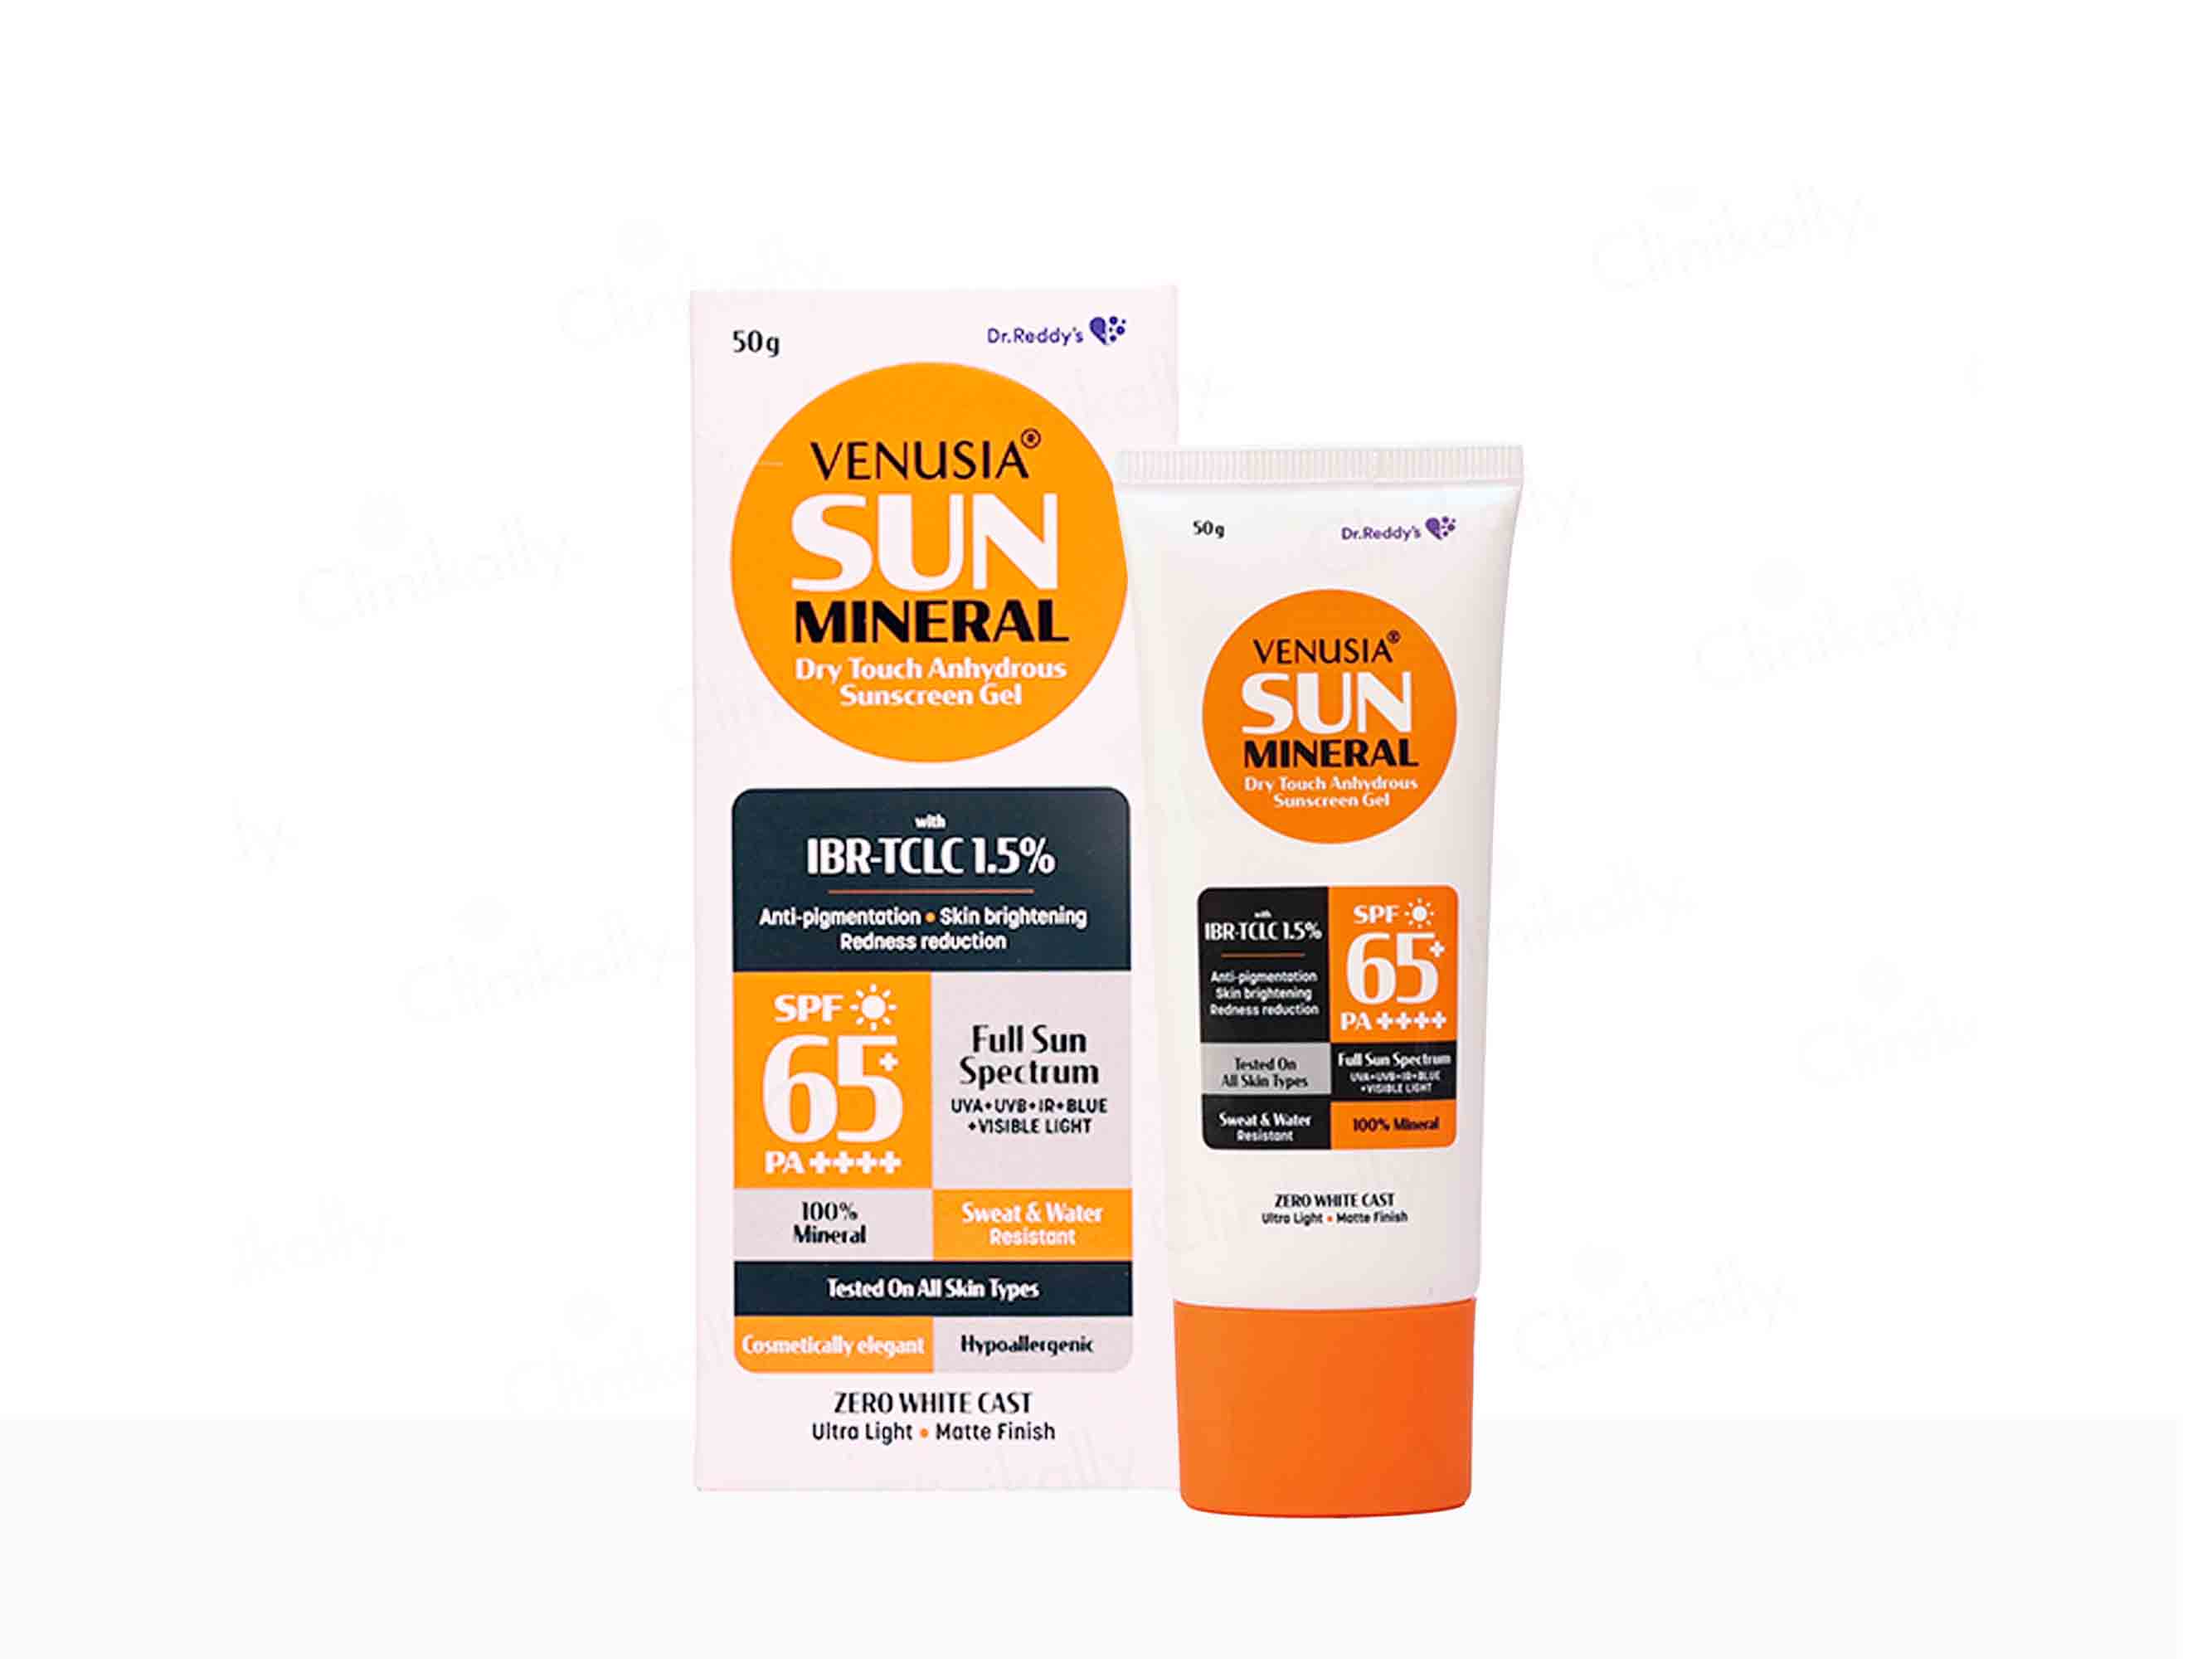 Venusia Sun Mineral Dry Touch Sunscreen Gel SPF 65+ PA++++